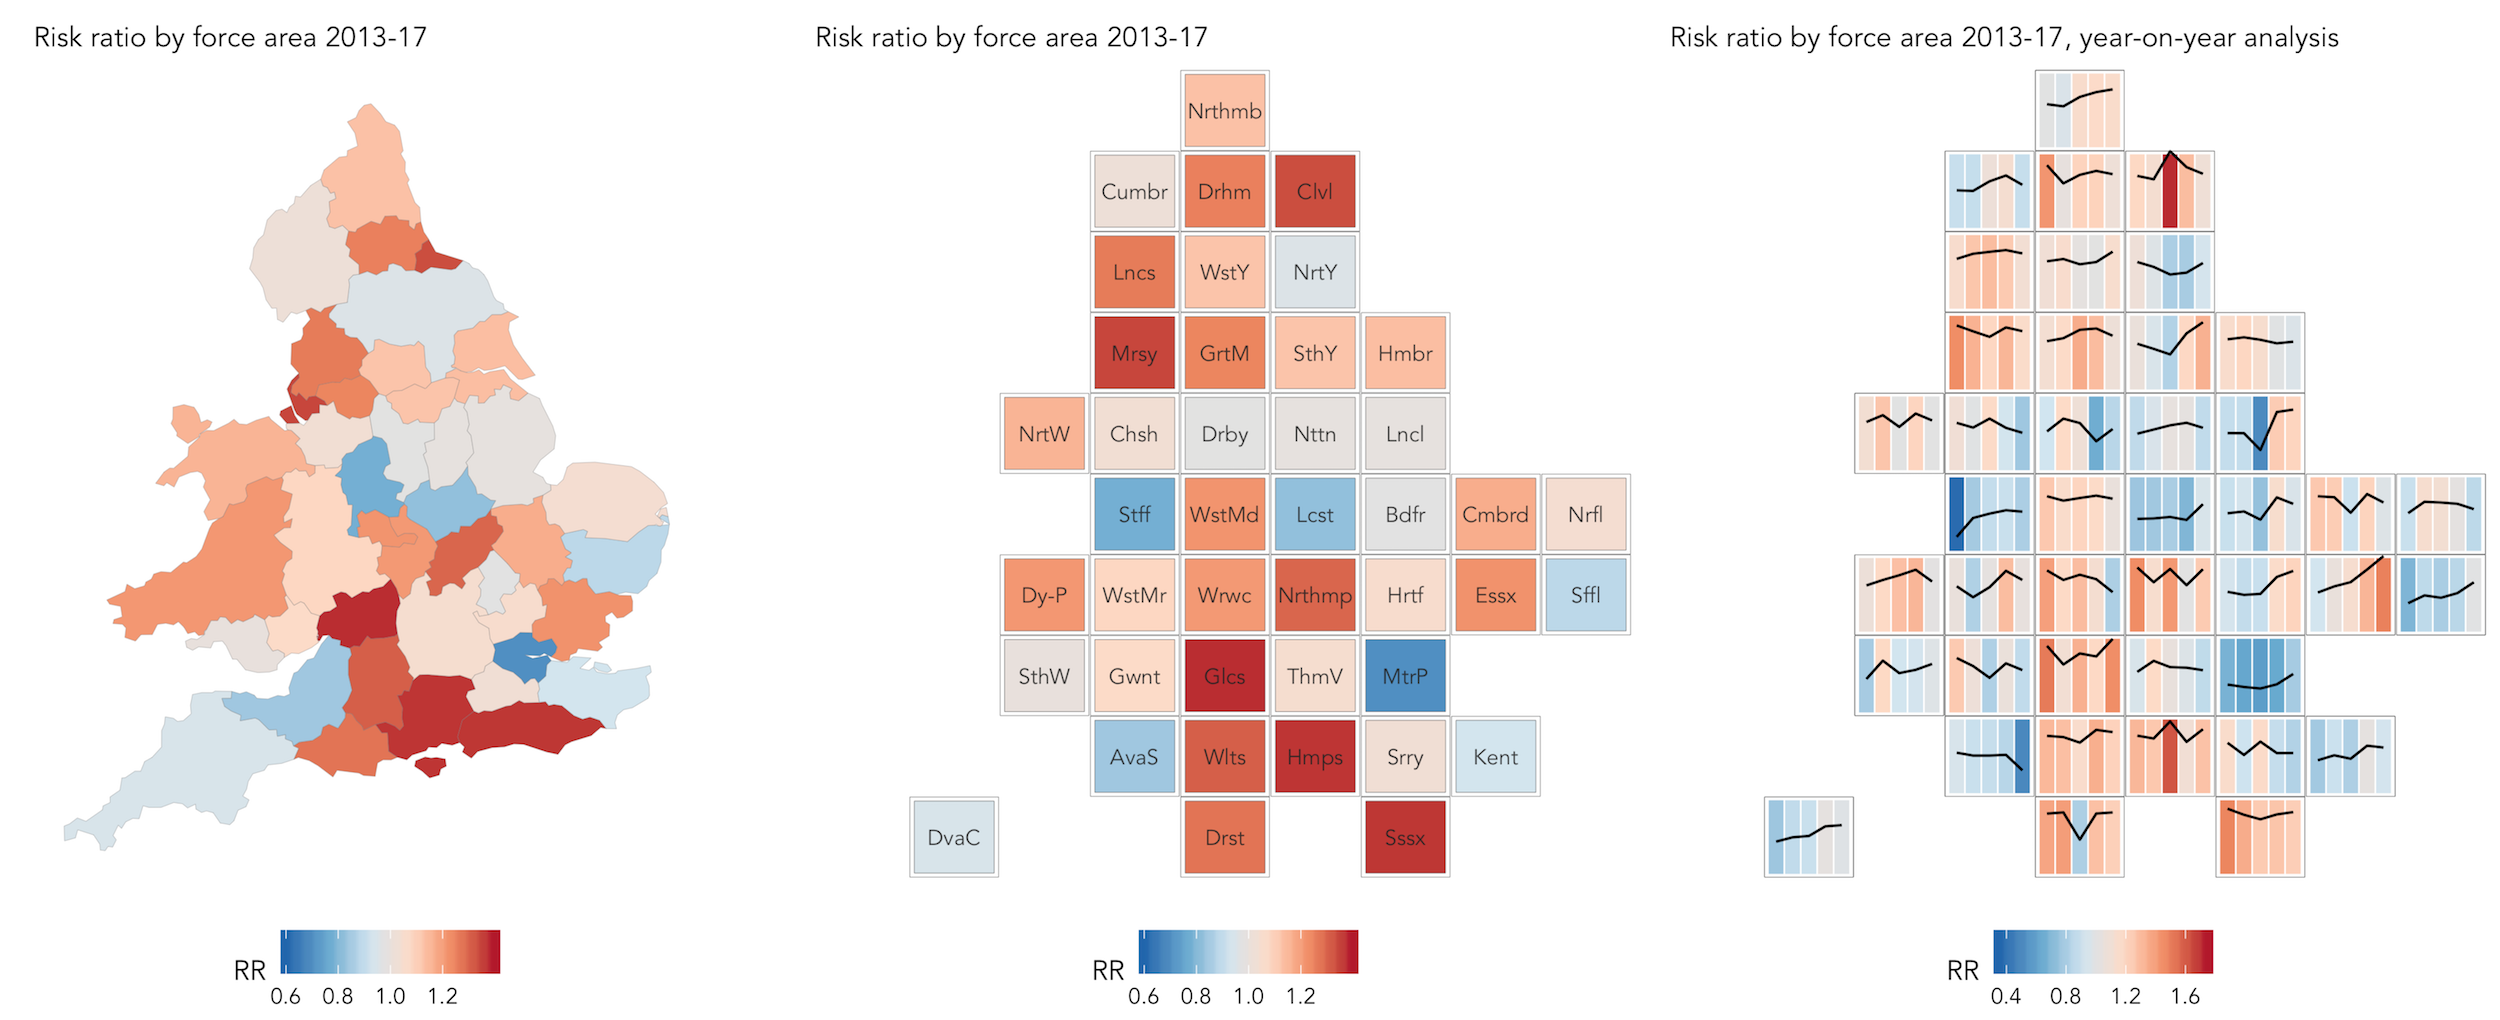 Risk ratios of KSI rates by force area, from 2013 to 2017 (left and middle), with year-on-year trend in risk ratios and raw KSIs (right).